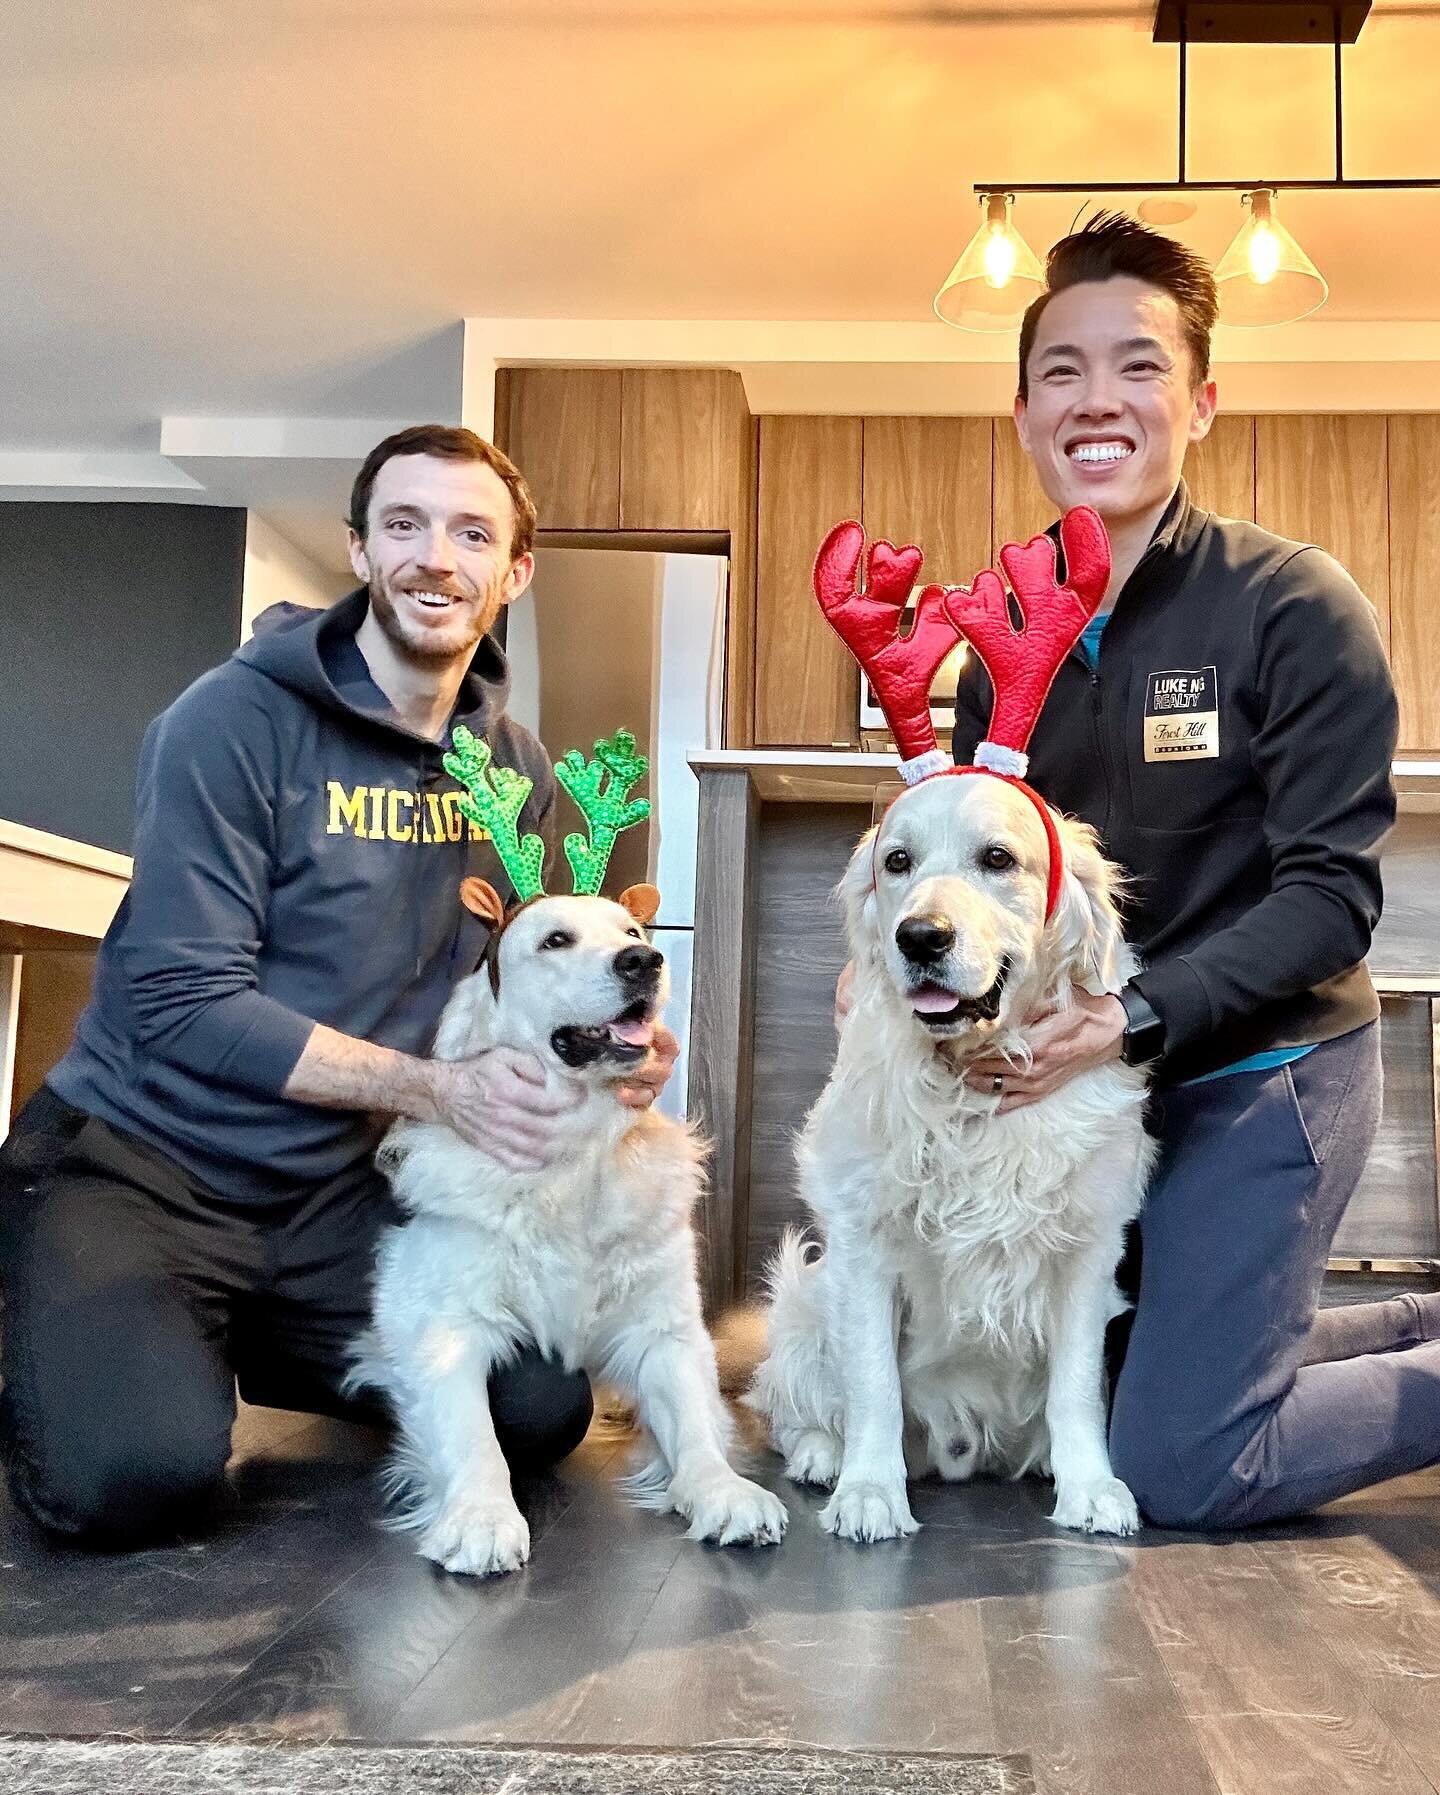 This was the best we could do. Merry Christmas! 🎄🐕🦮
.
.
.
.
#christmas #family #dogs #goldenretriever #home #holidays